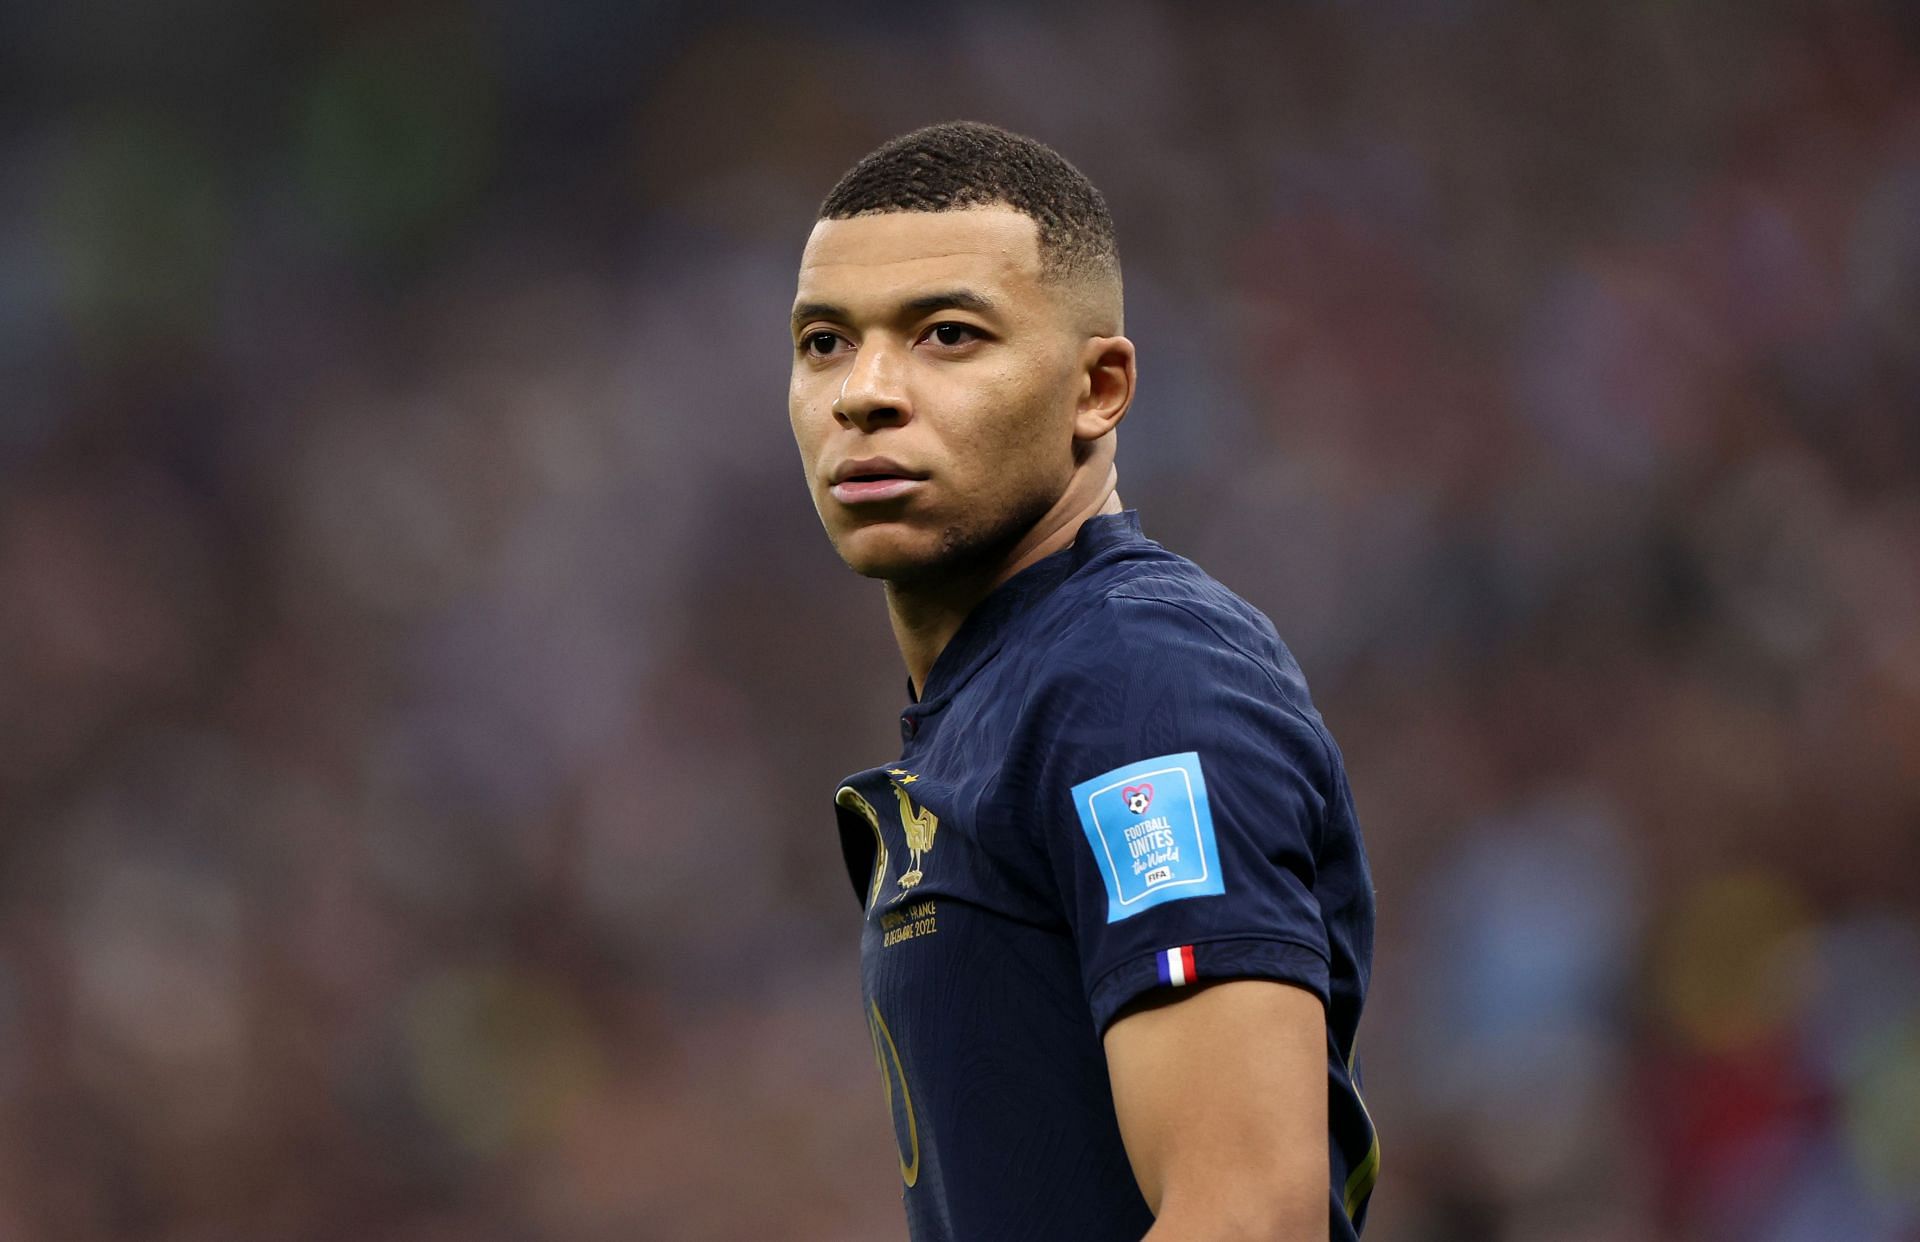 Kylian Mbappe could become the next France captain